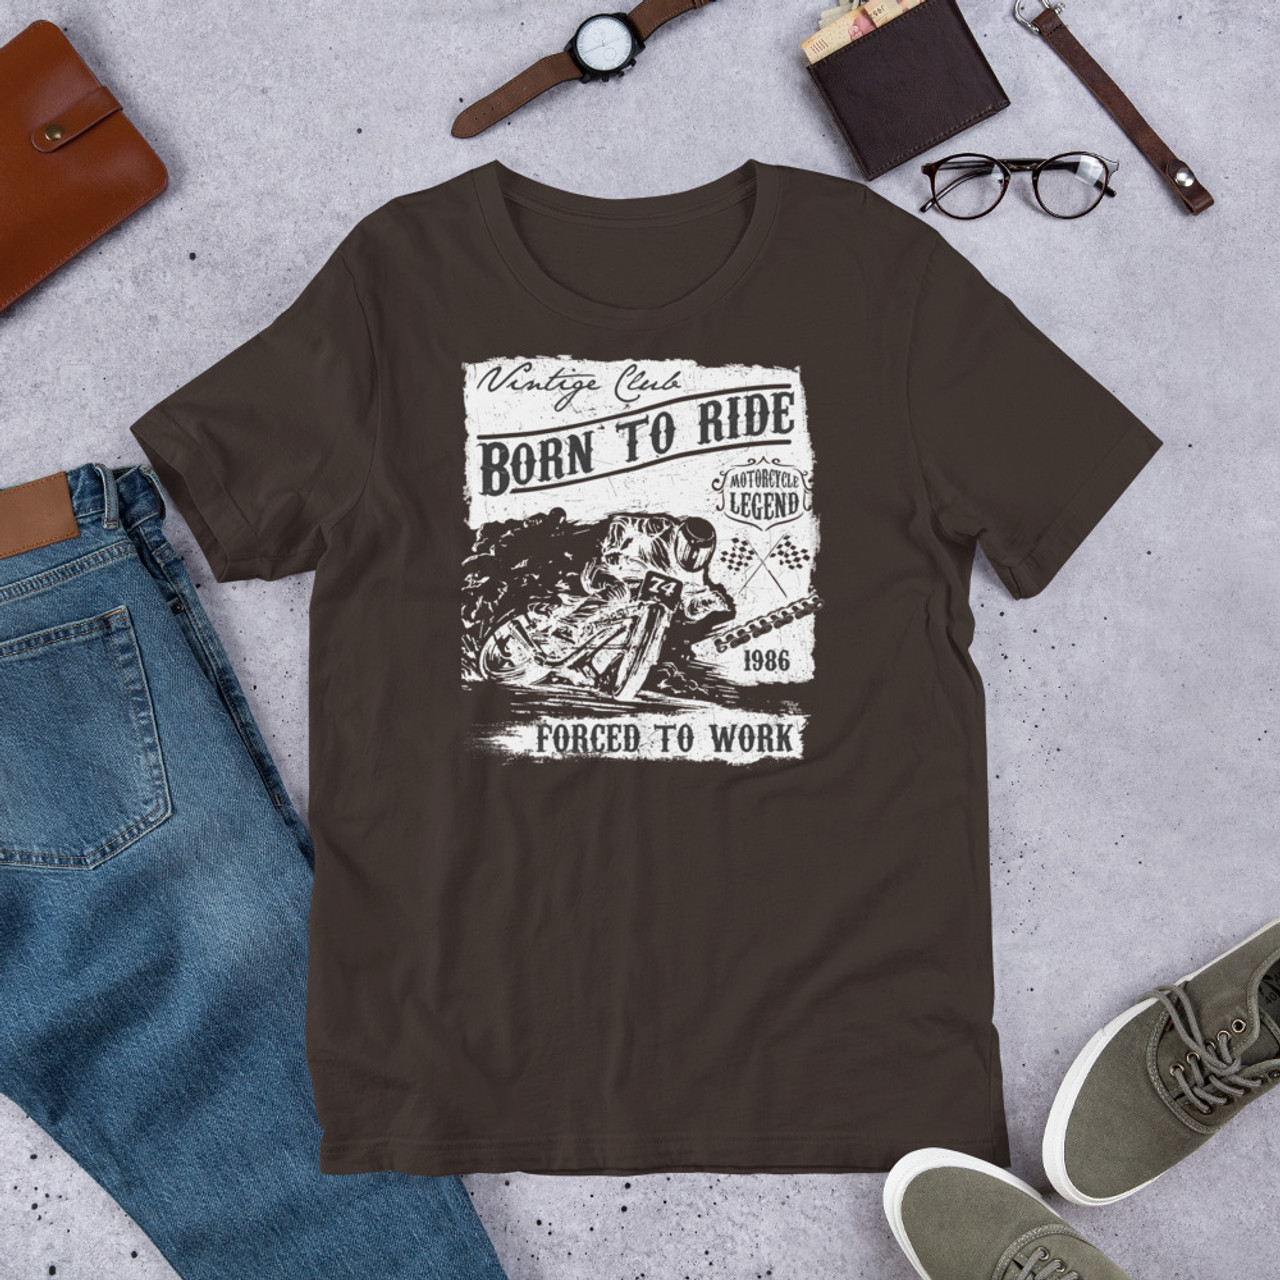 Brown t shirt born to ride